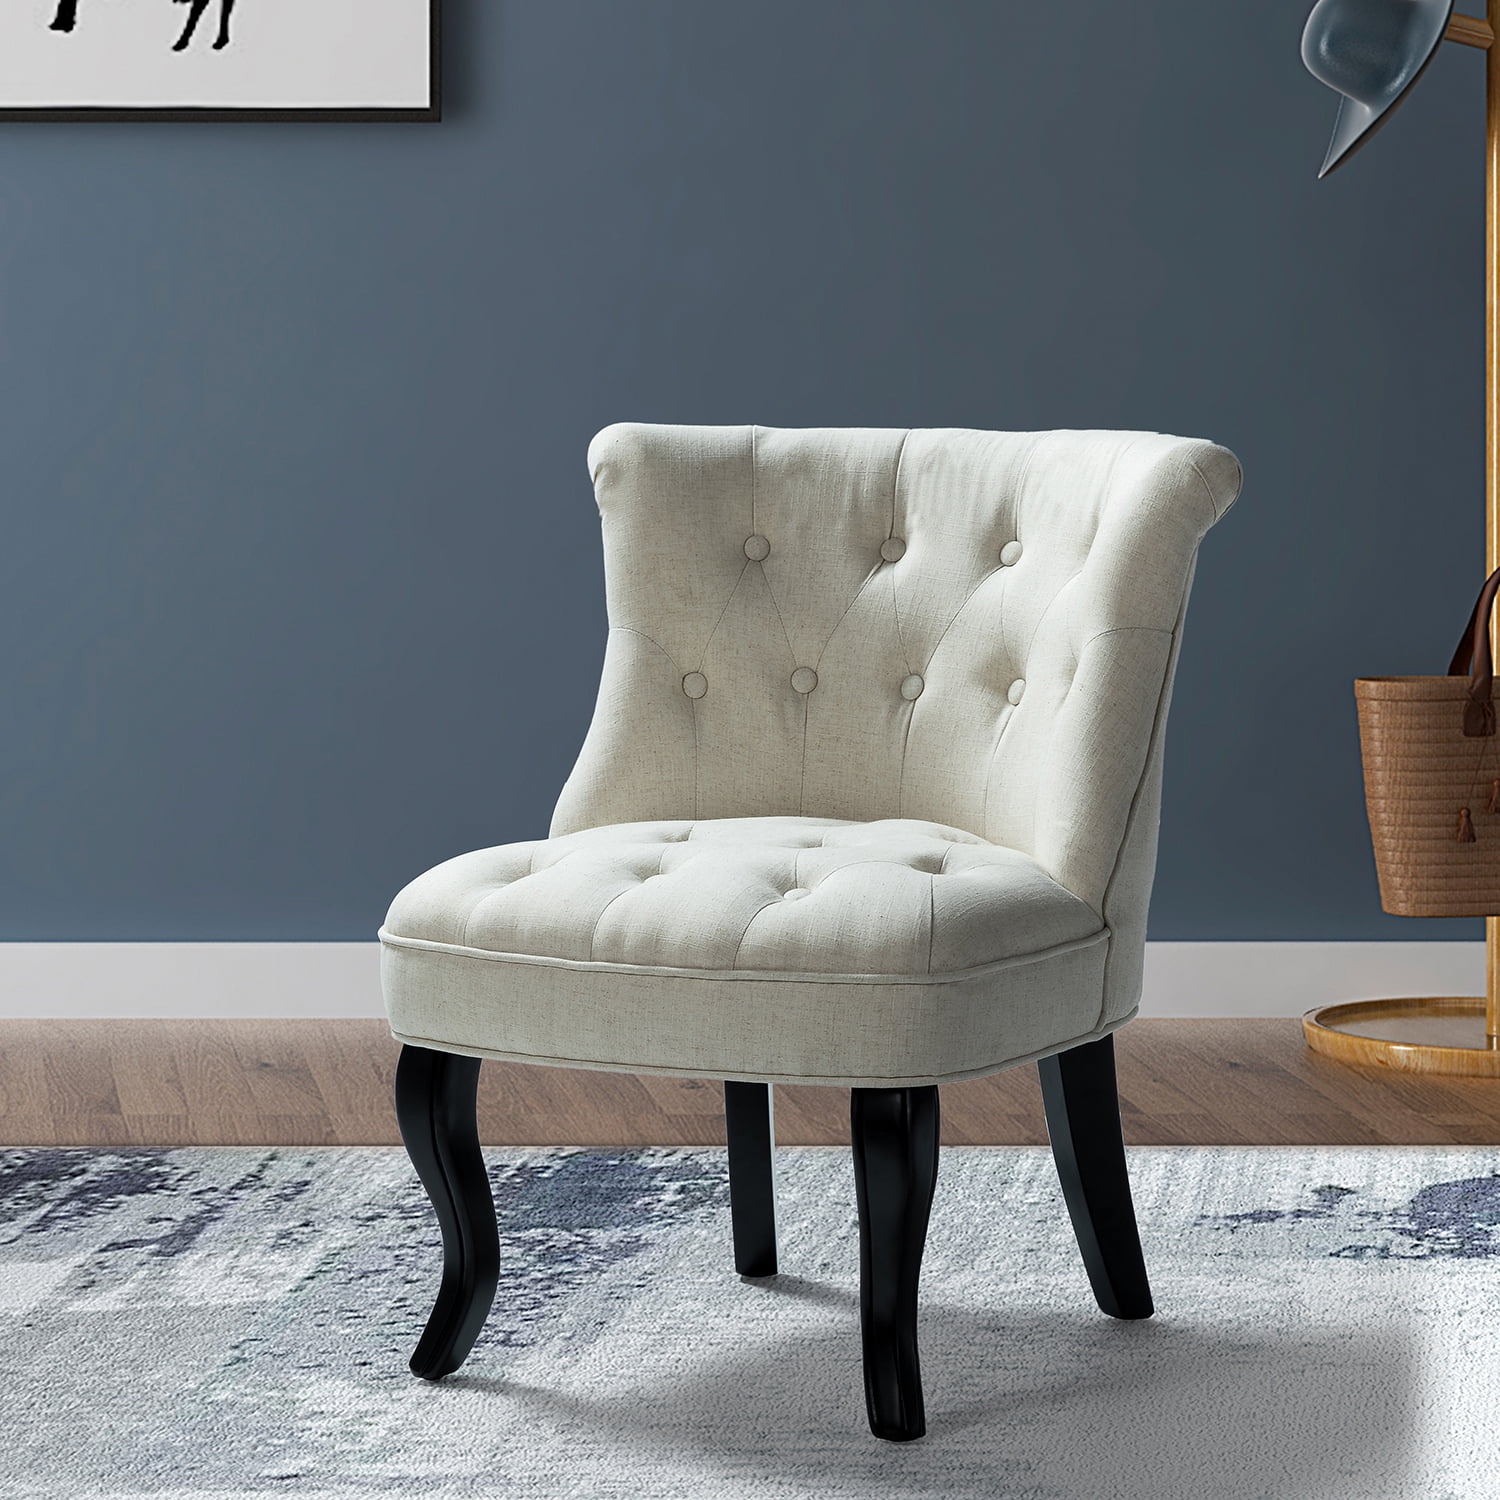 Details about   Scallop Shell Chair Upholstered Wing Back Armchair Living Bedroom Lounge Sofa 